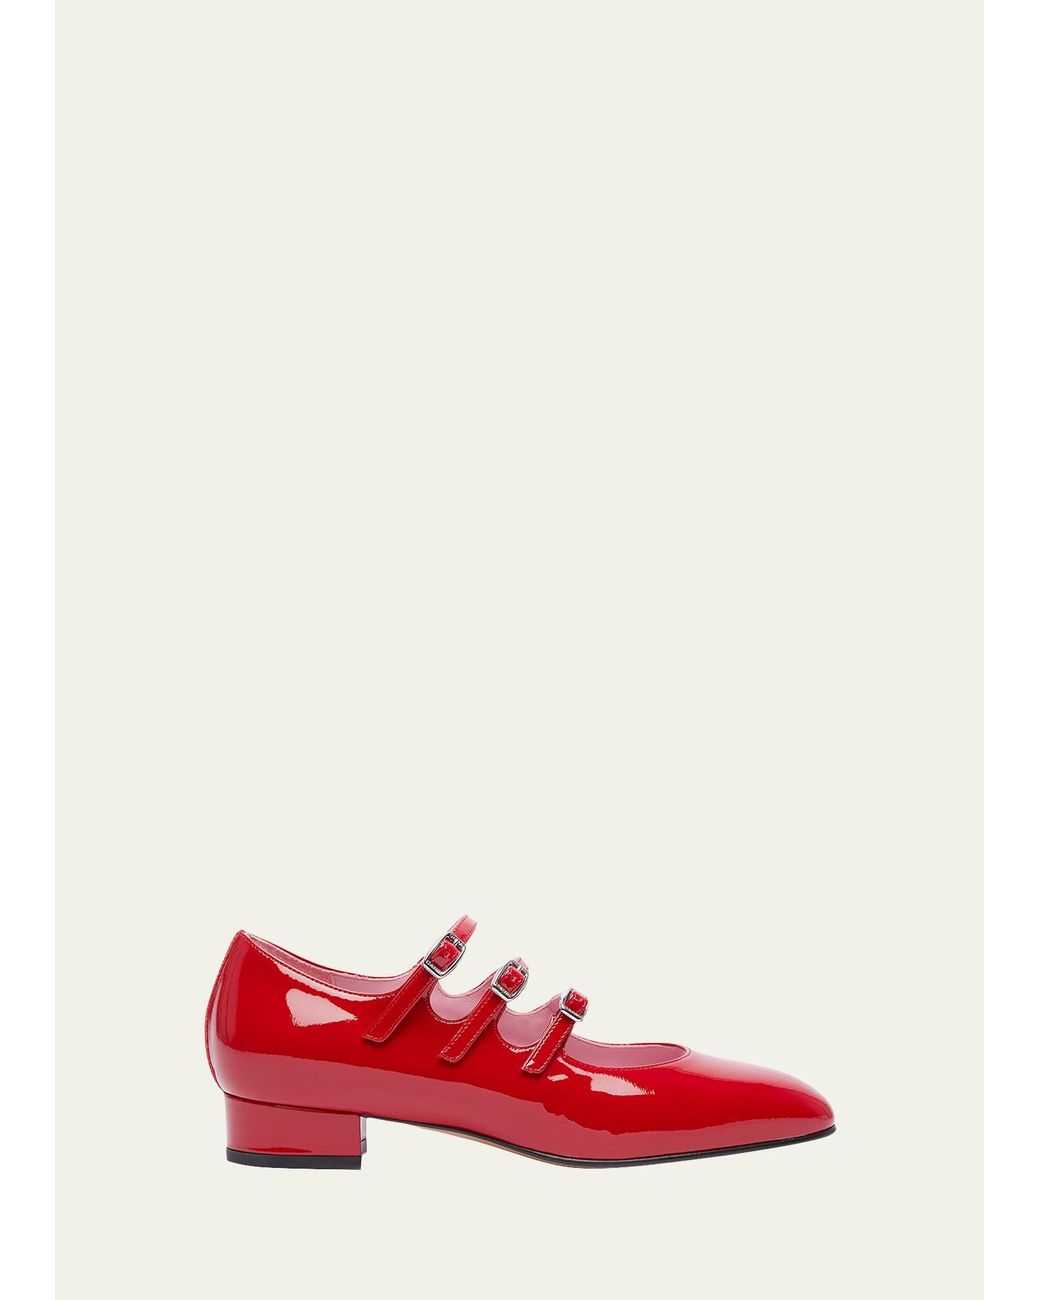 CAREL Ariana Patent Buckle-trio Ballerina Pumps in Red | Lyst